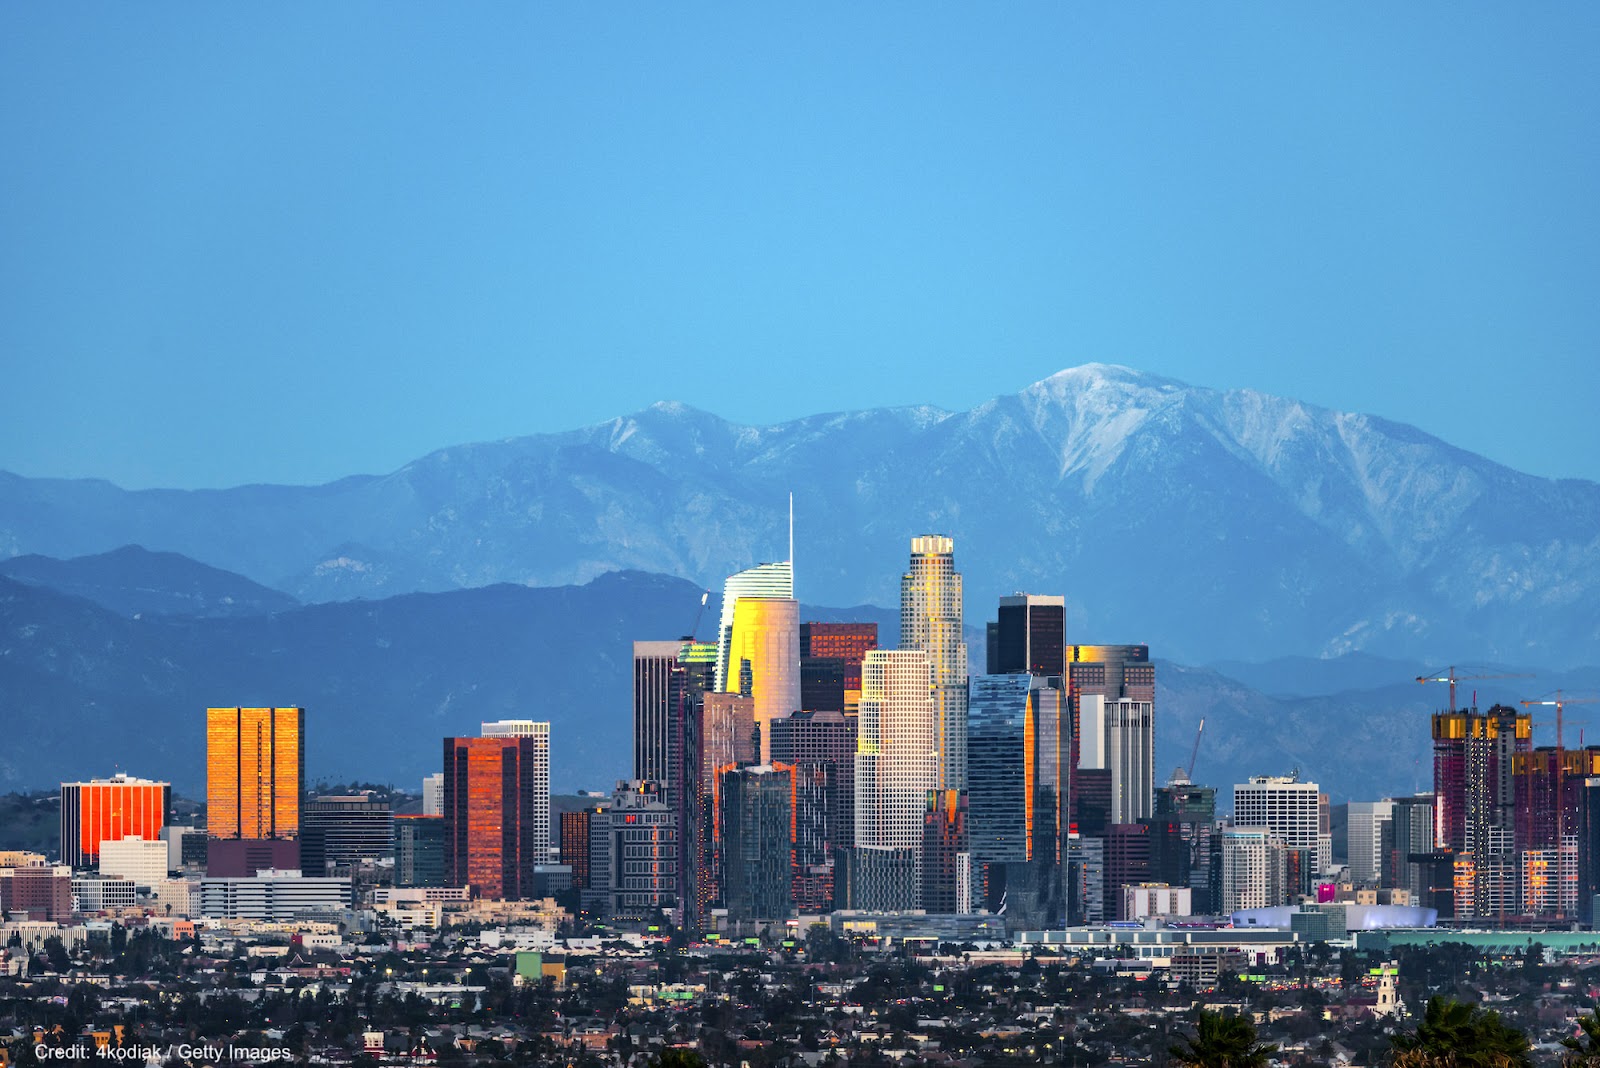 L.A.'s new era of climate leadership - C40 Cities